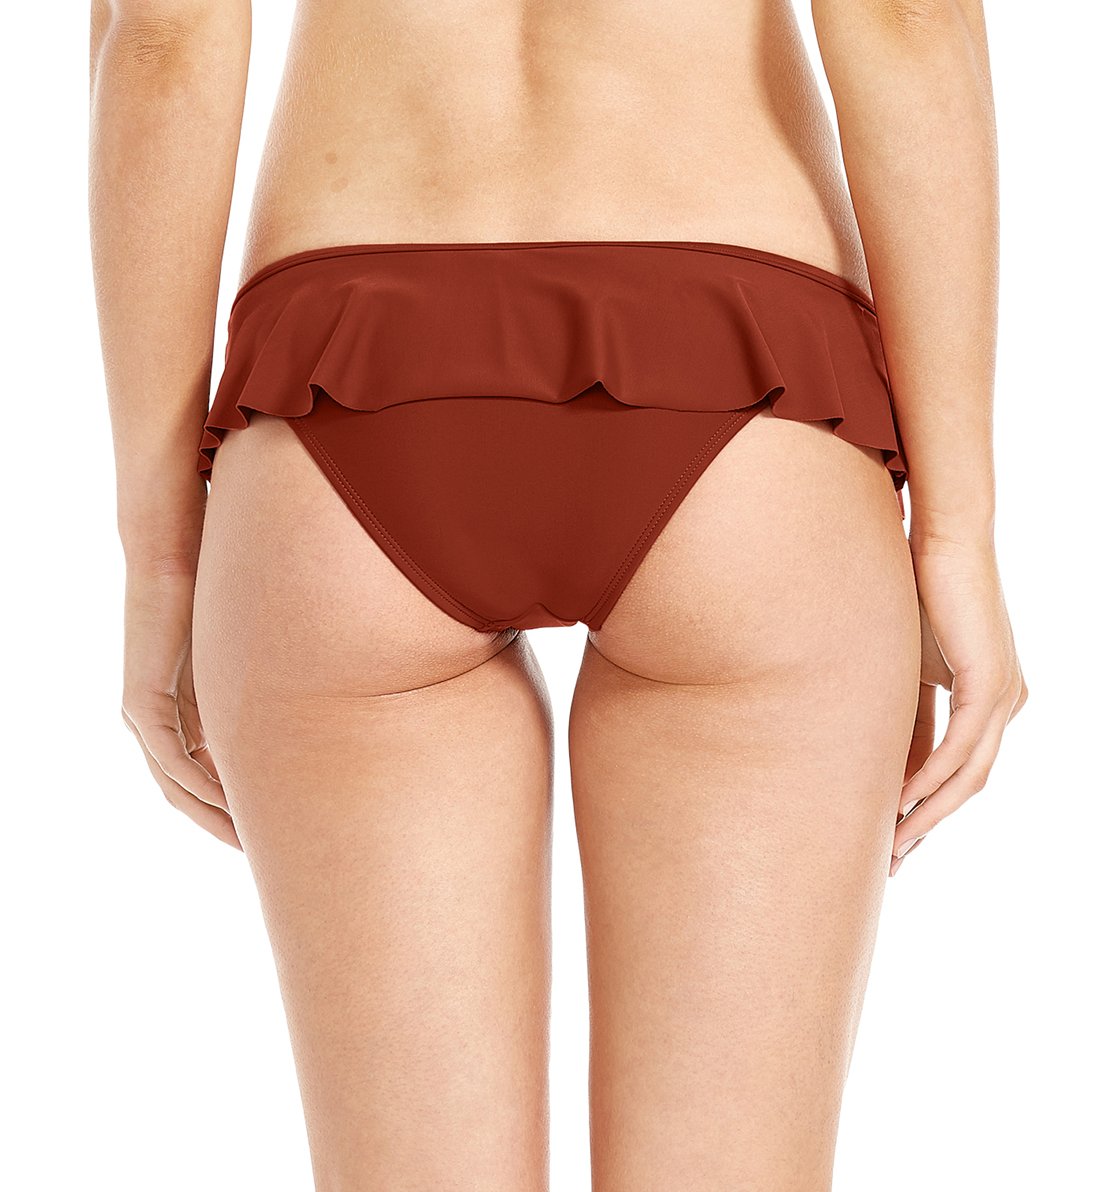 Body Glove Smoothies Lily Mid Rise Frilled Bikini Brief (39506137),XS,Terracotta - Terracotta,XS